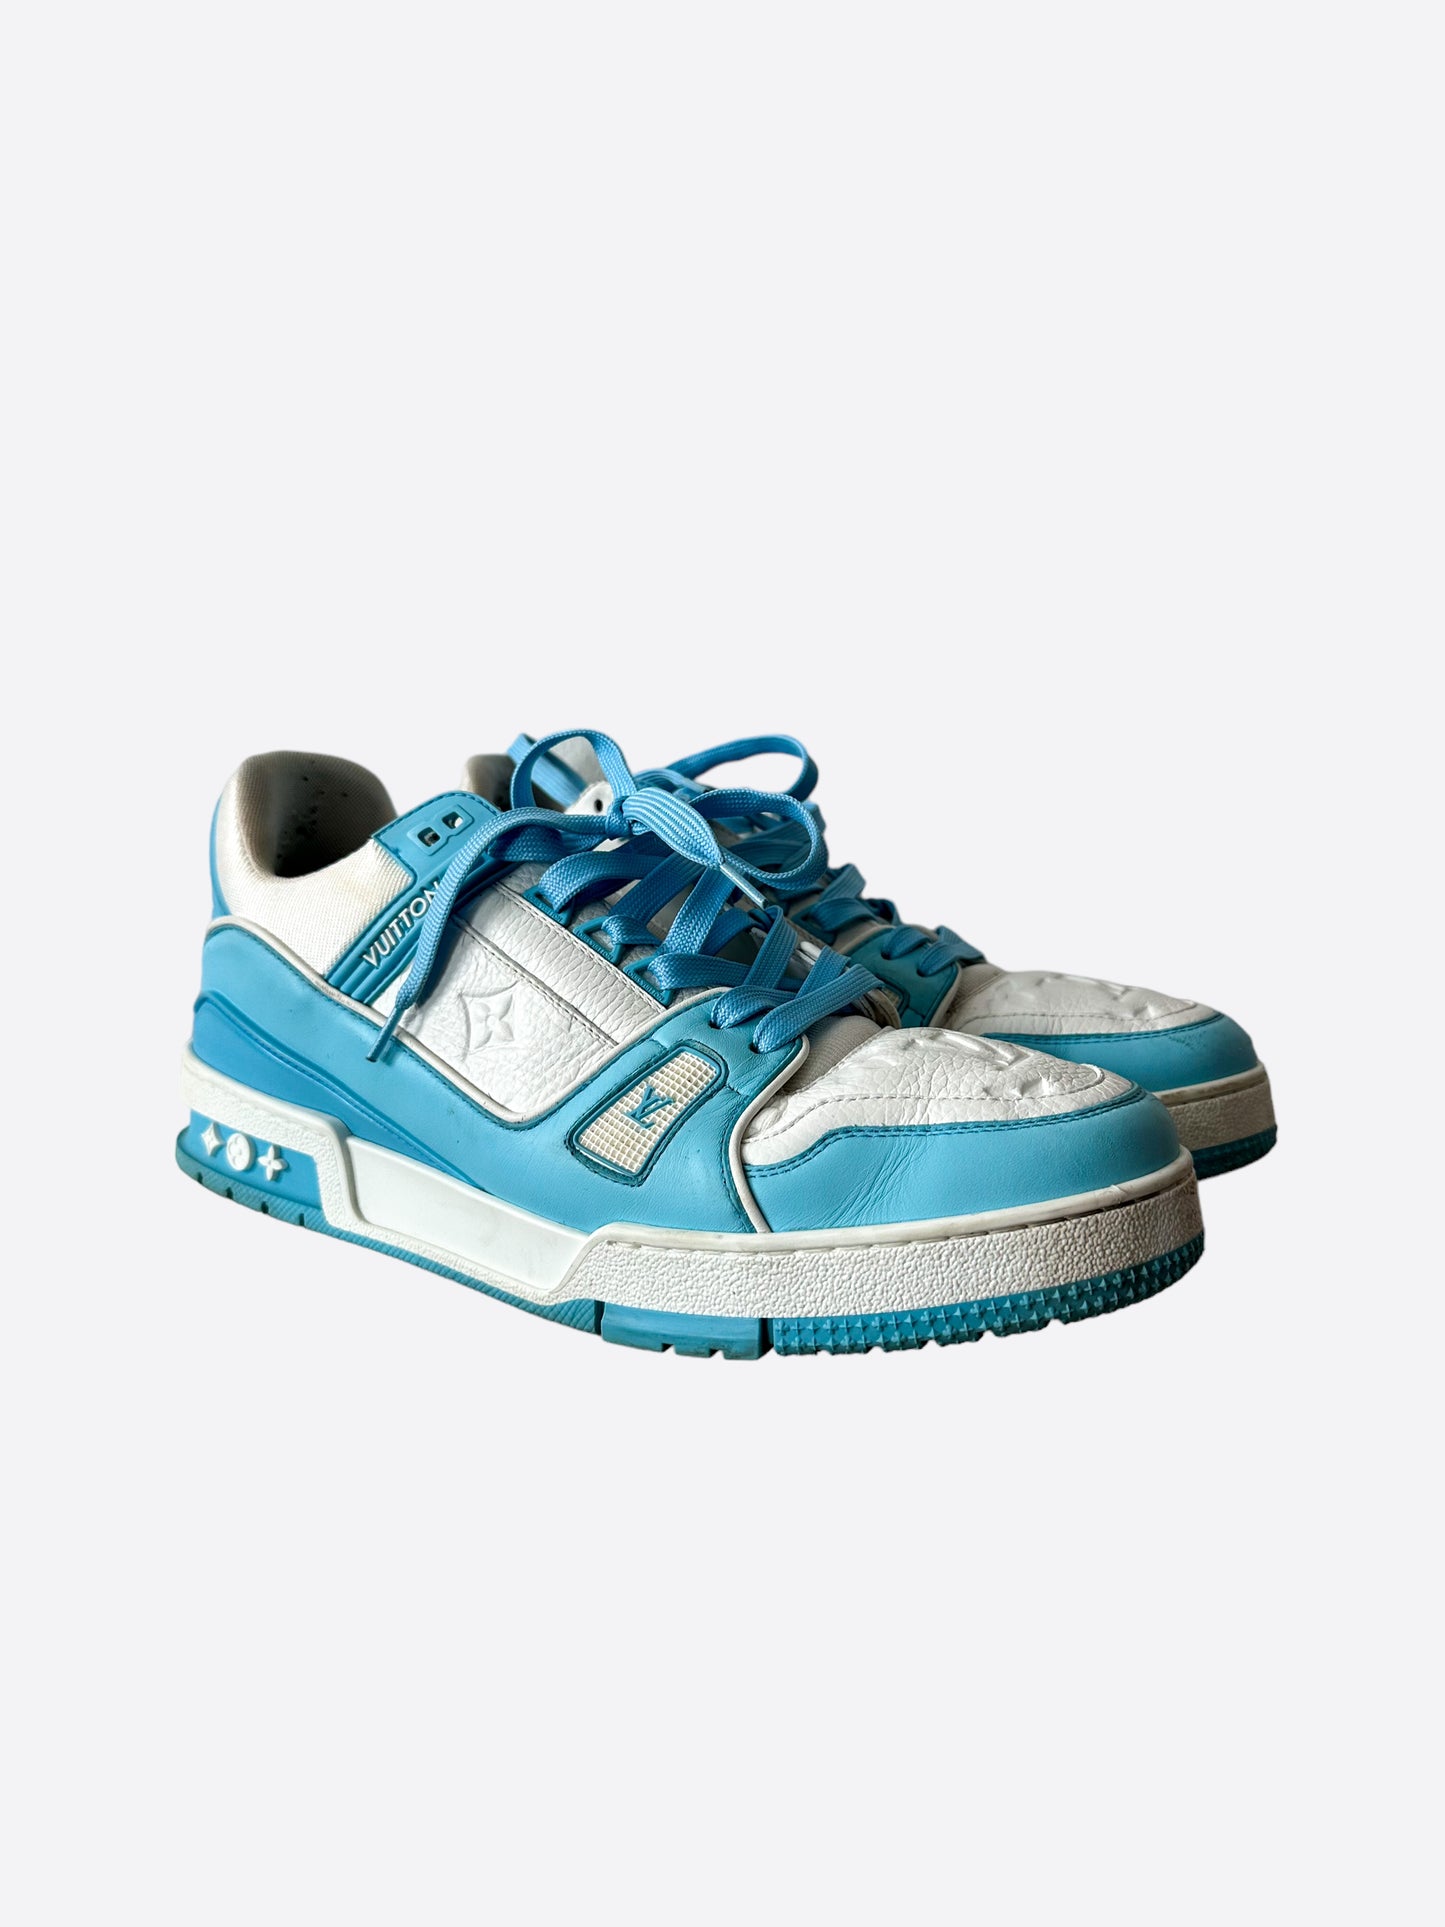 lv sneakers blue and white